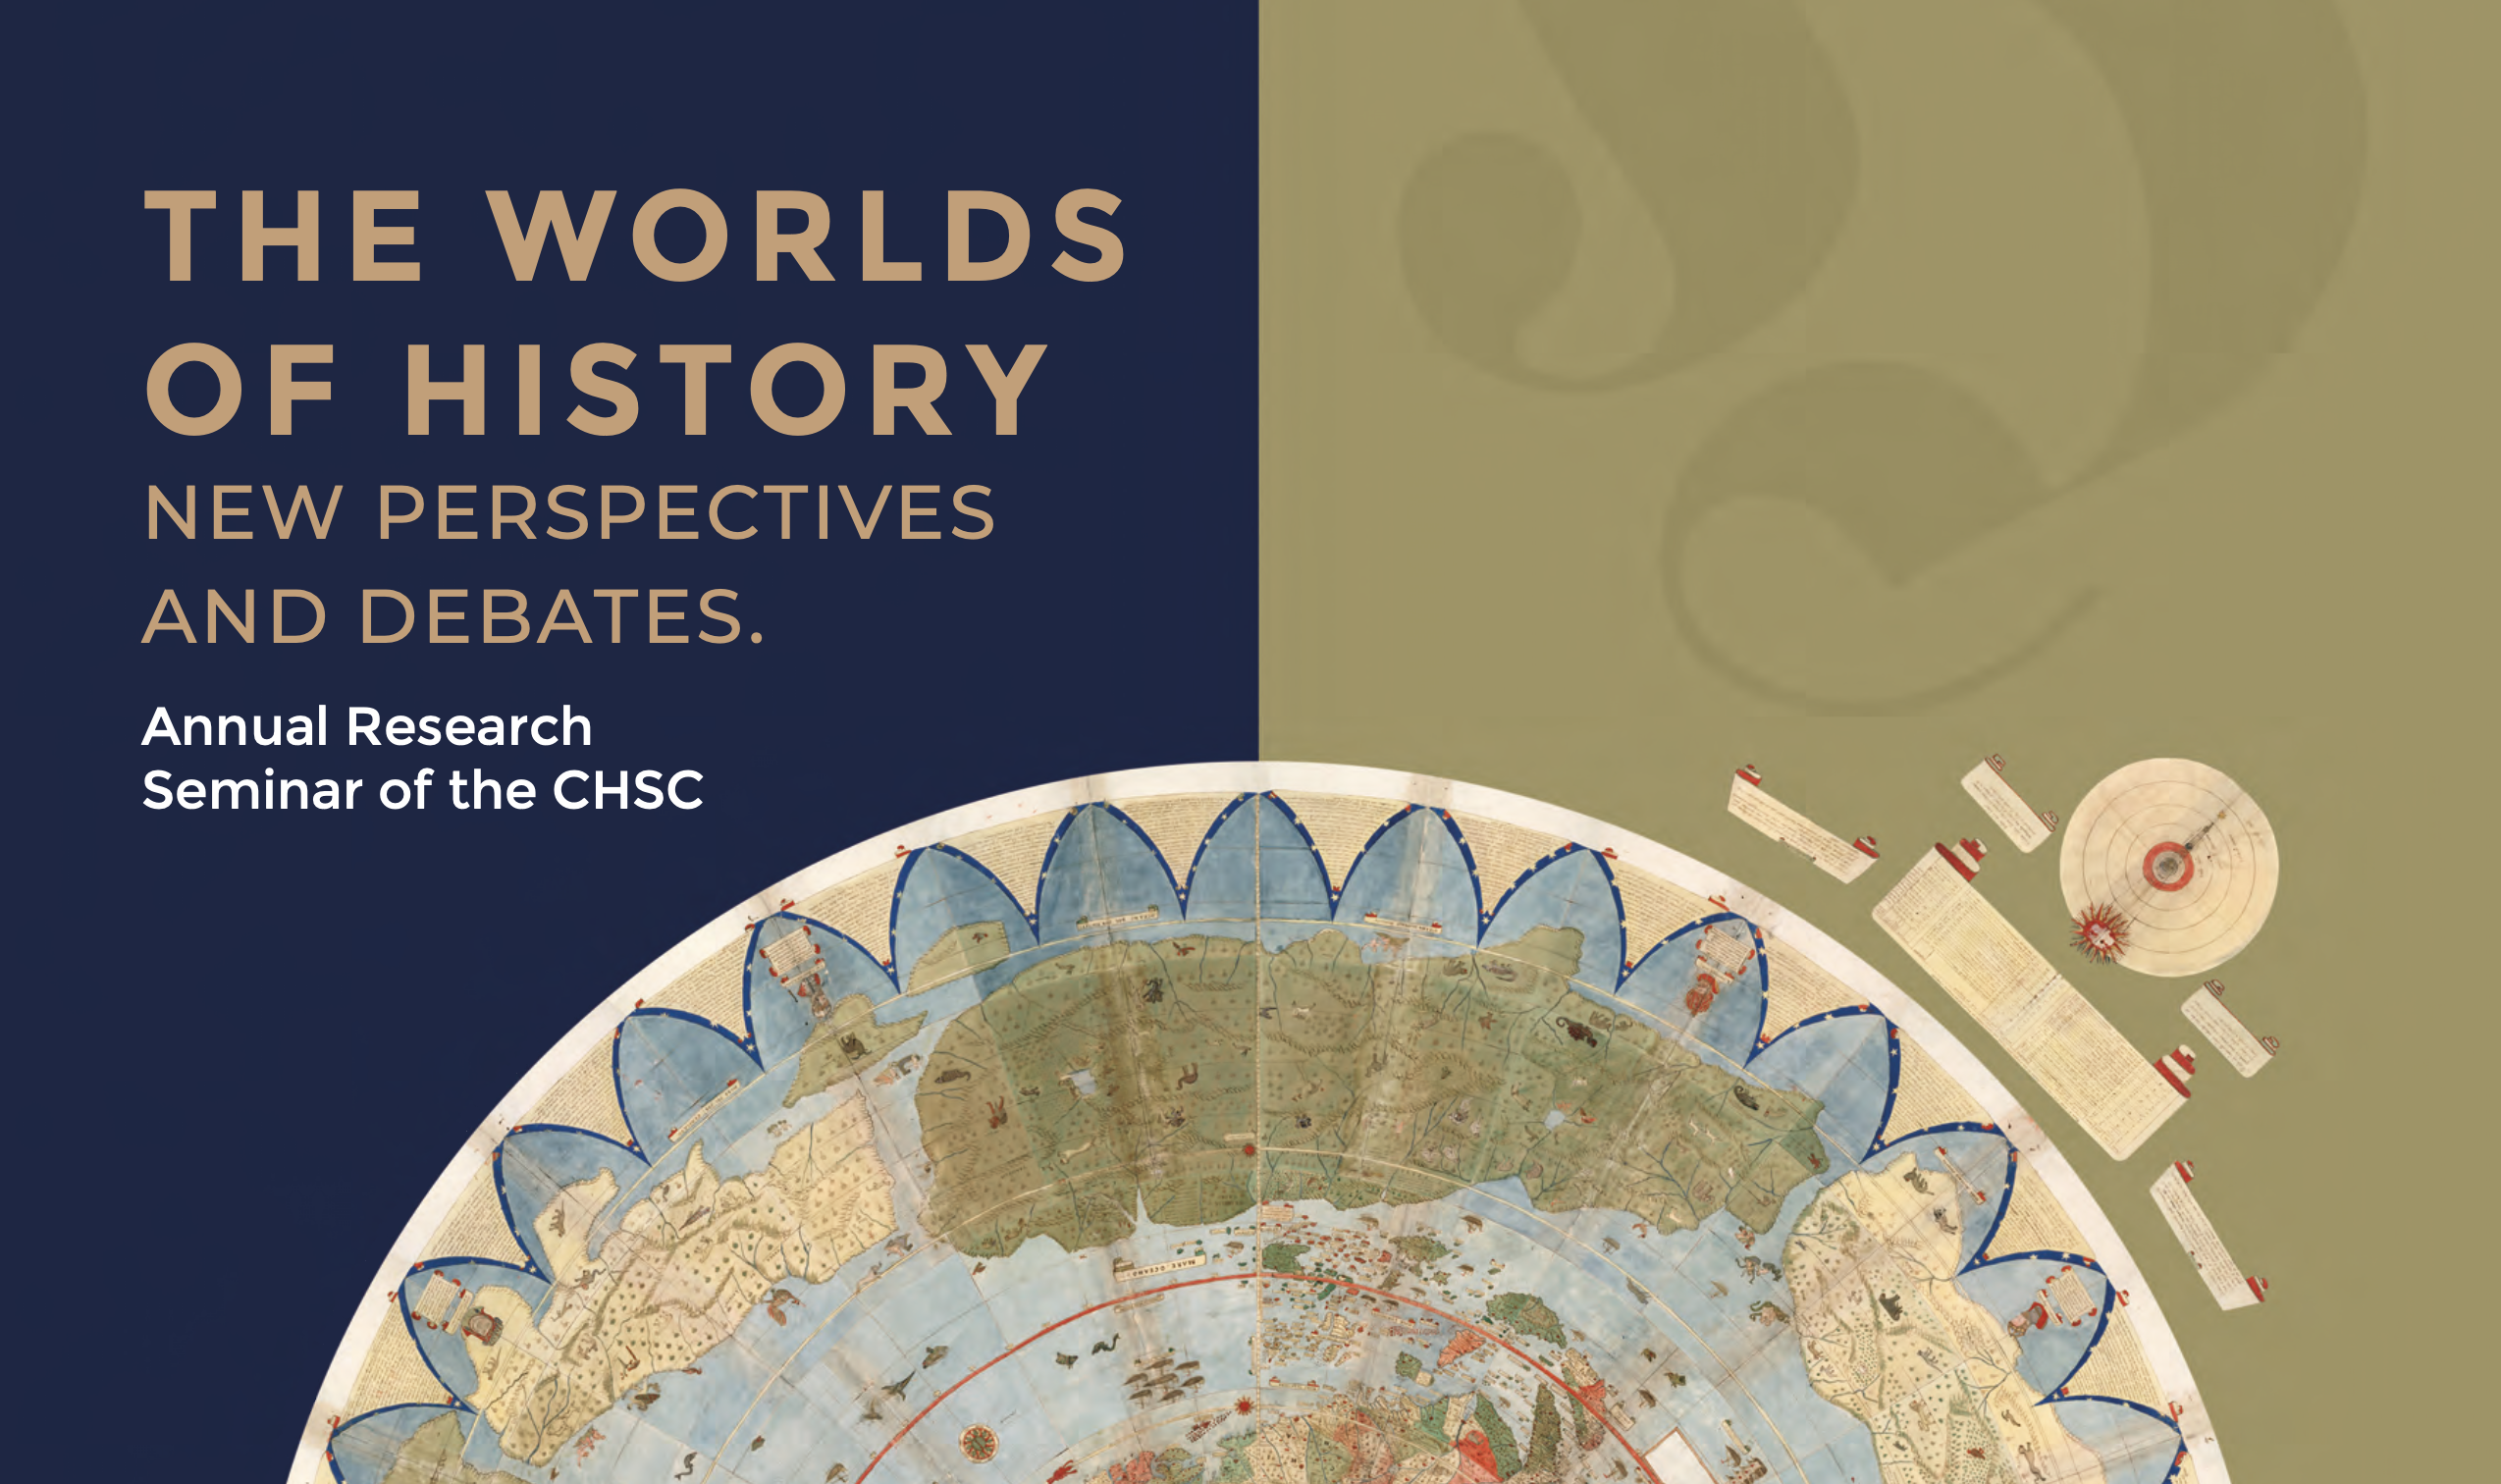 The Worlds of History. New perspectives and debates. Conference by Prof. Sebastian Conrad